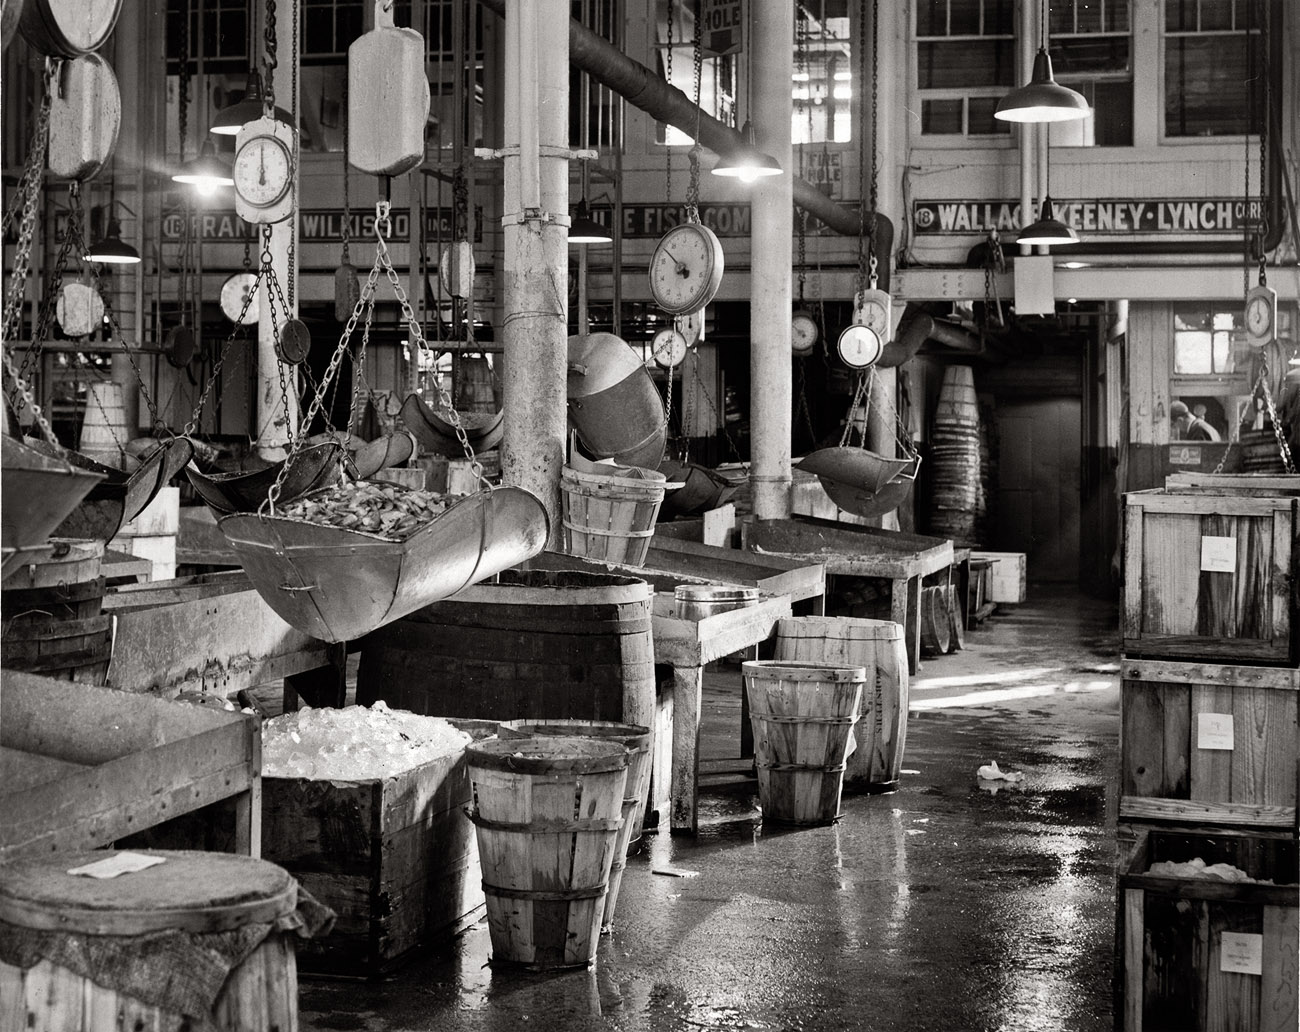 Still life with ice and shrimp: The Fulton Fish Market in 1954. View full size. Photograph by Walter Albertin of the New York World Telegram.